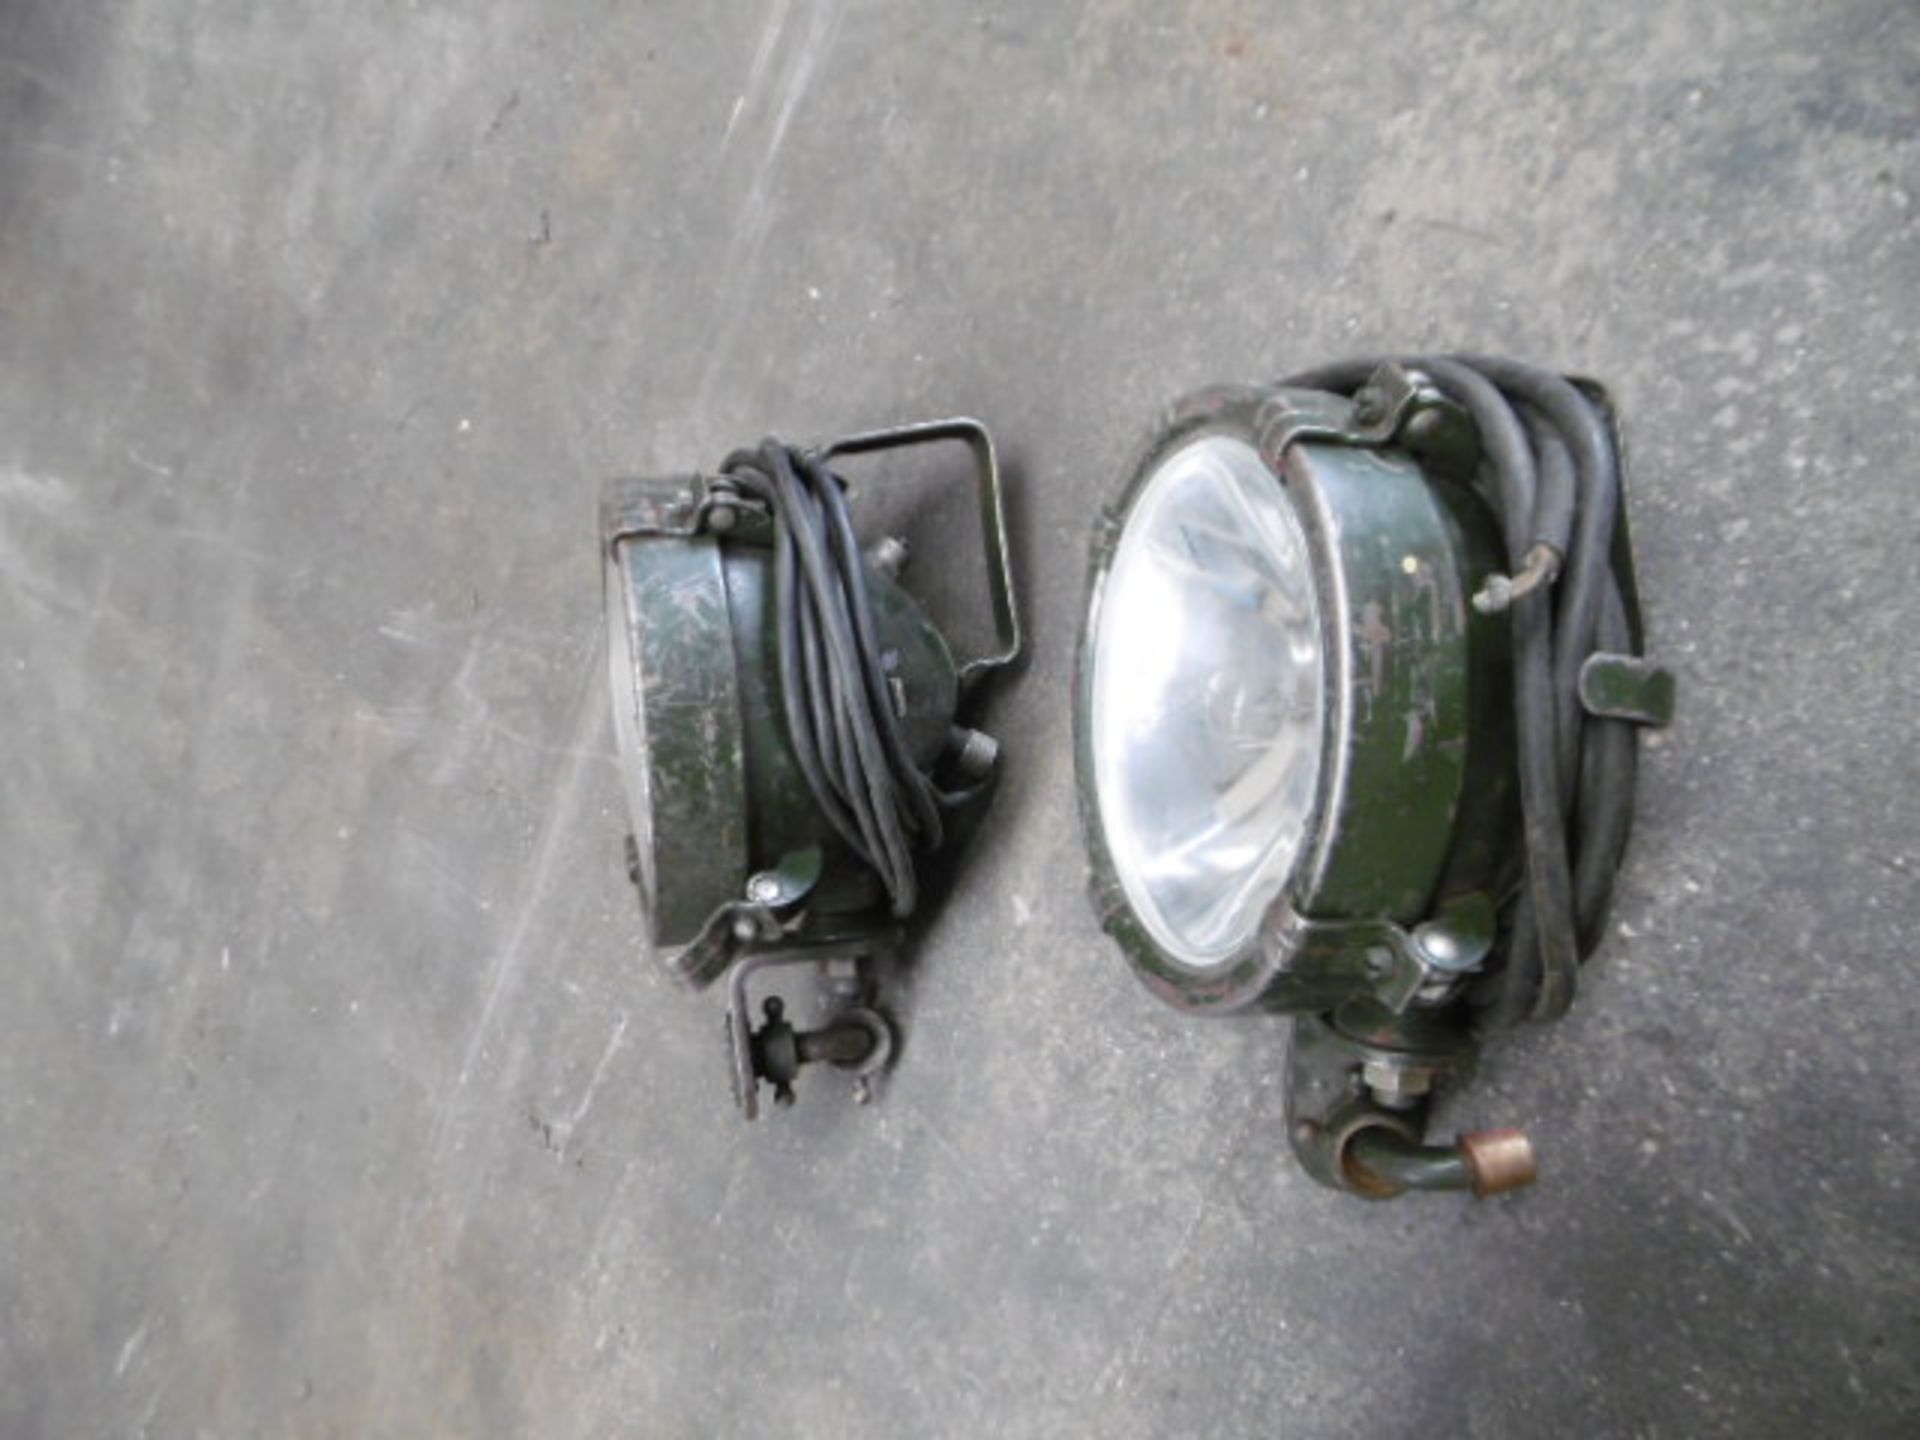 2 x AFV Vehicle Spot Lamps - Image 2 of 4